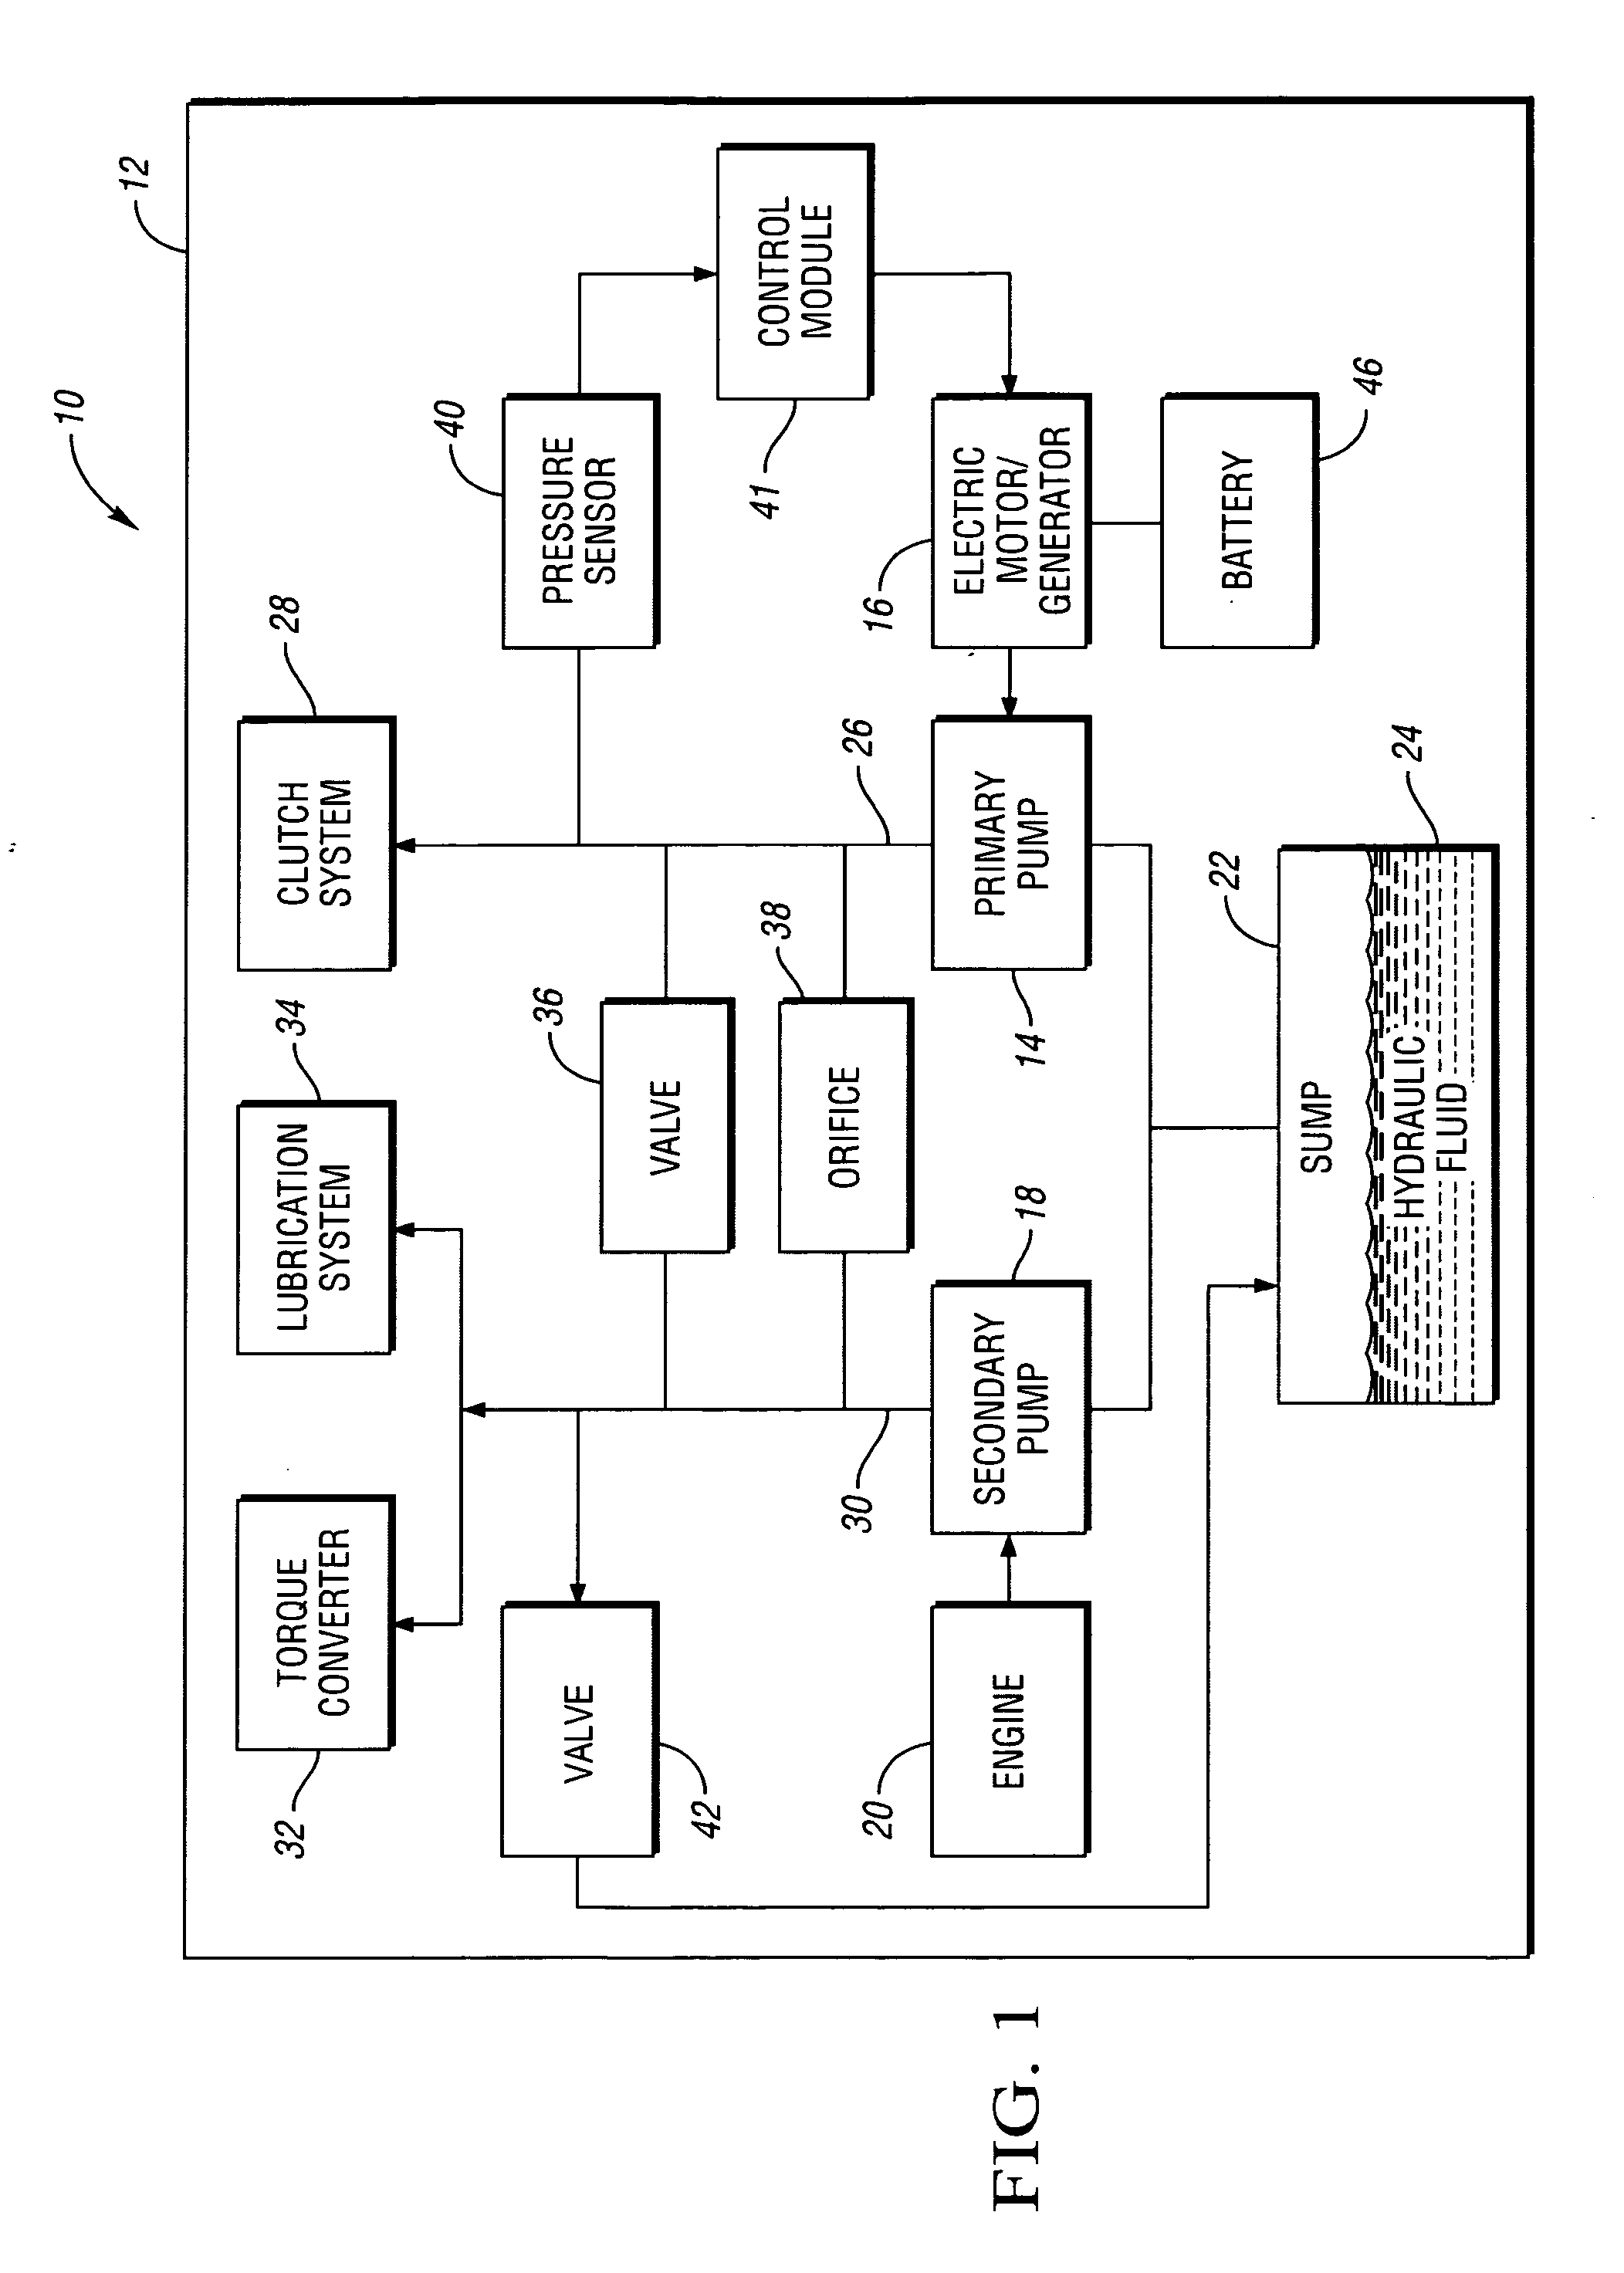 Dual-pump fluid distribution system for a hybrid electric vehicle